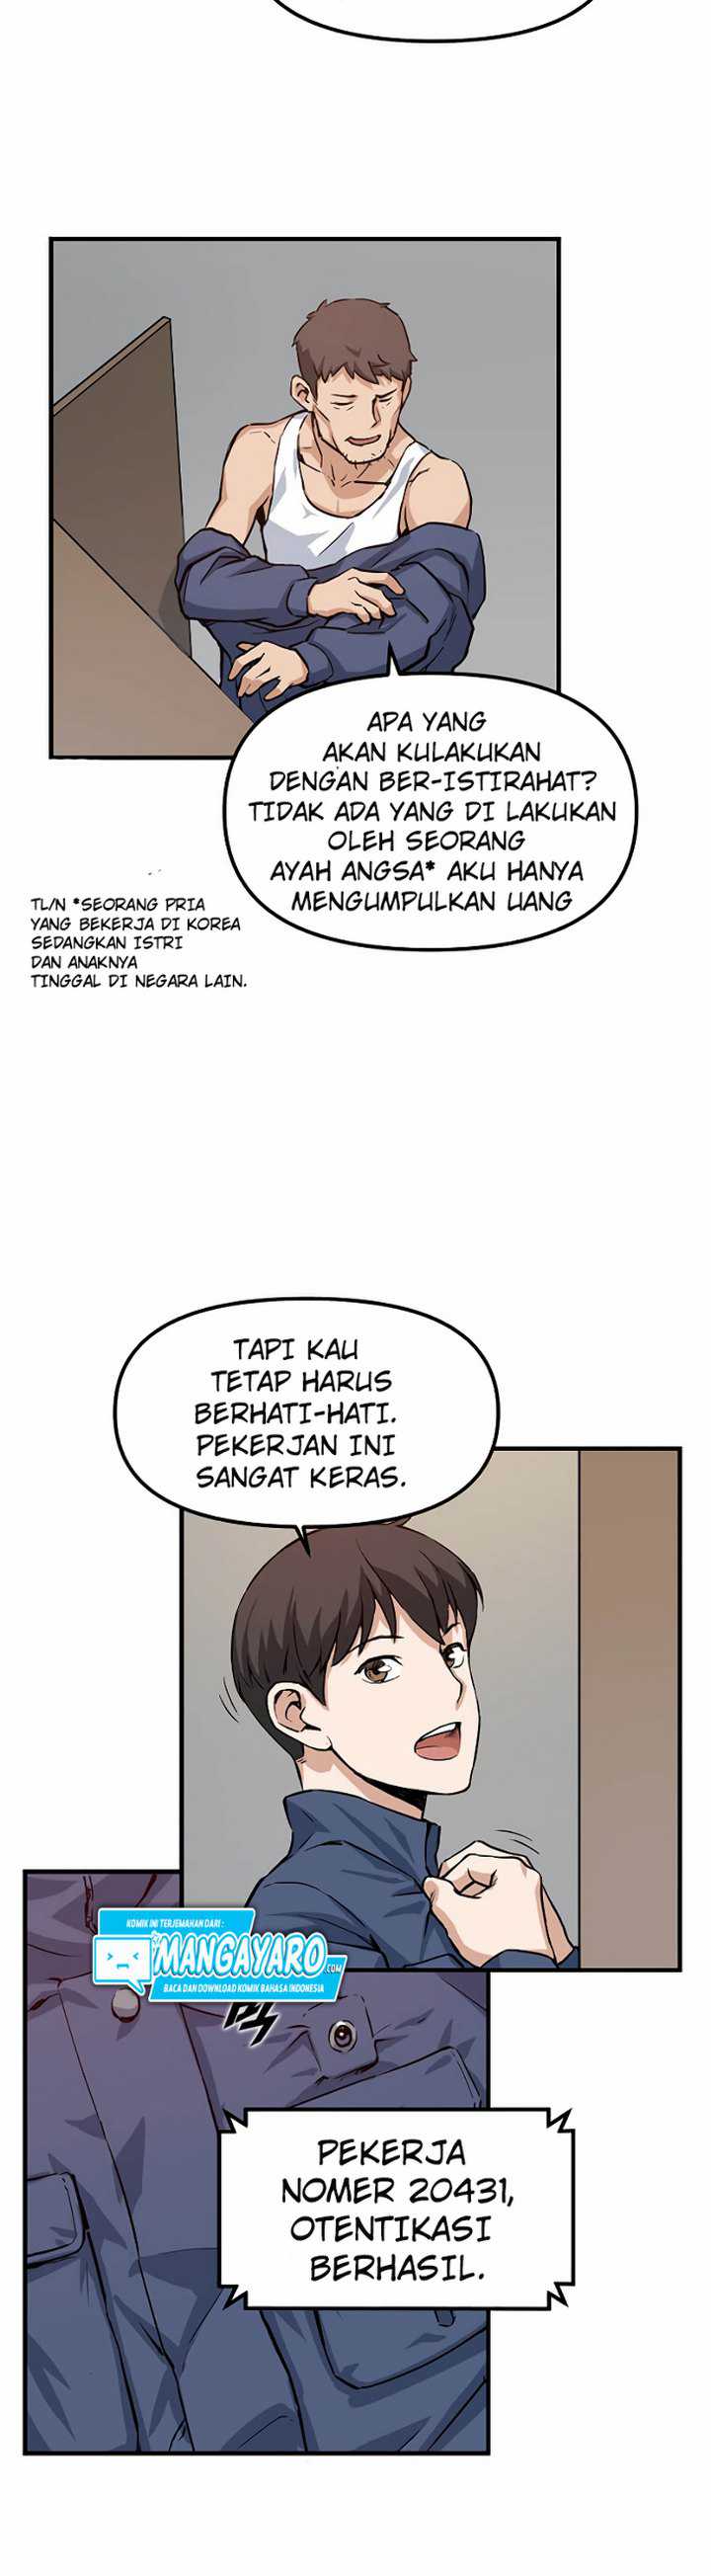 Leveling Up With Likes Chapter 03.2 Bahasa indonesia